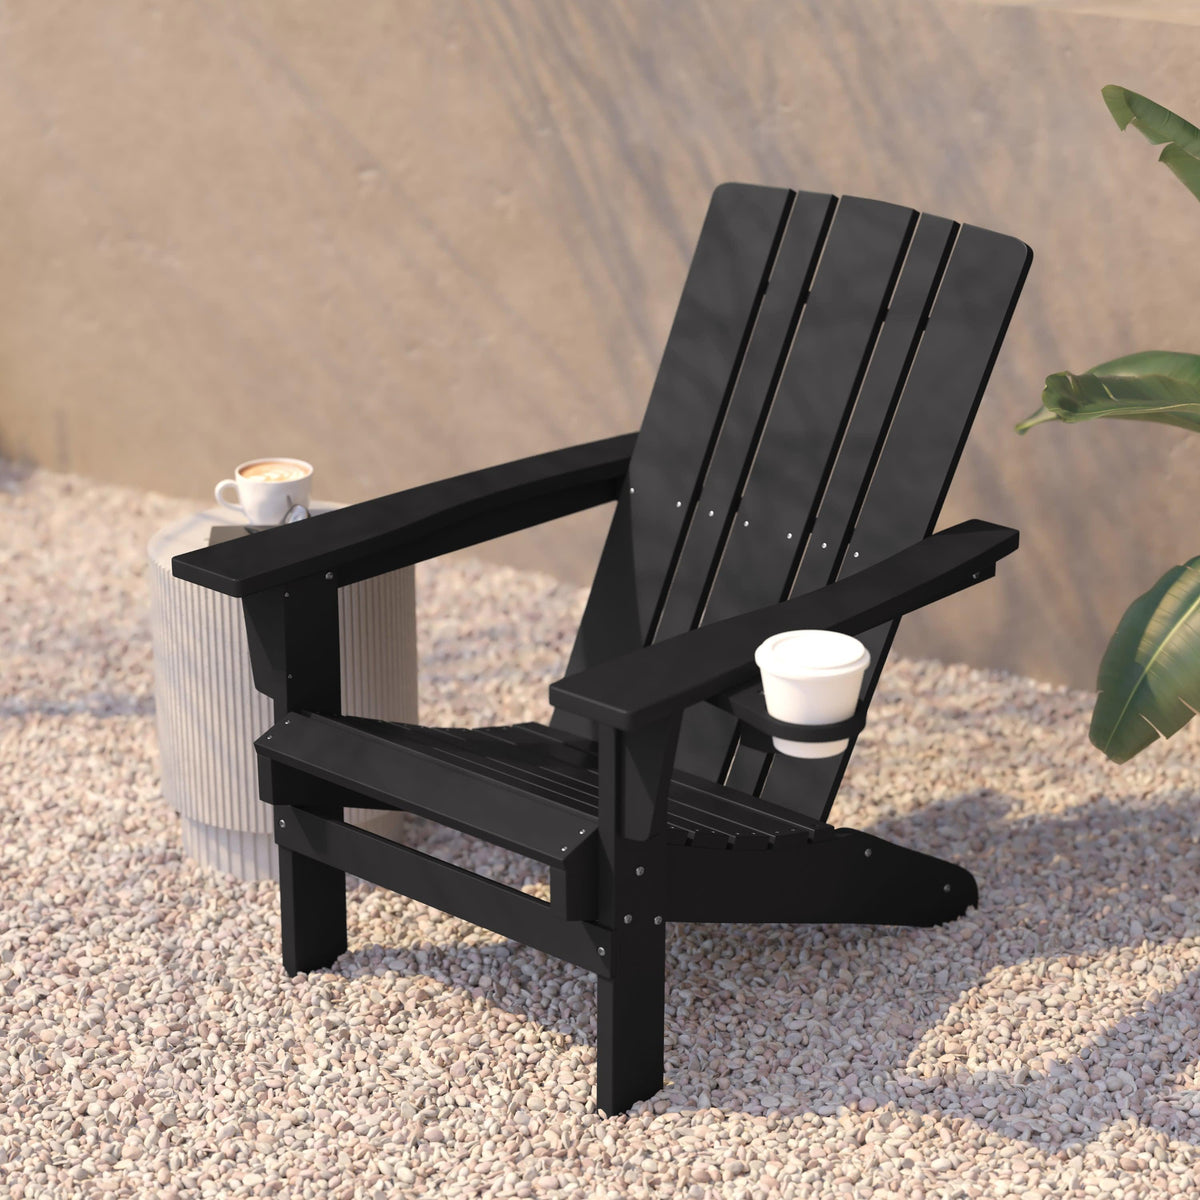 Black |#| Commercial Grade All-Weather Adirondack Chair with Swiveling Cupholder - Black